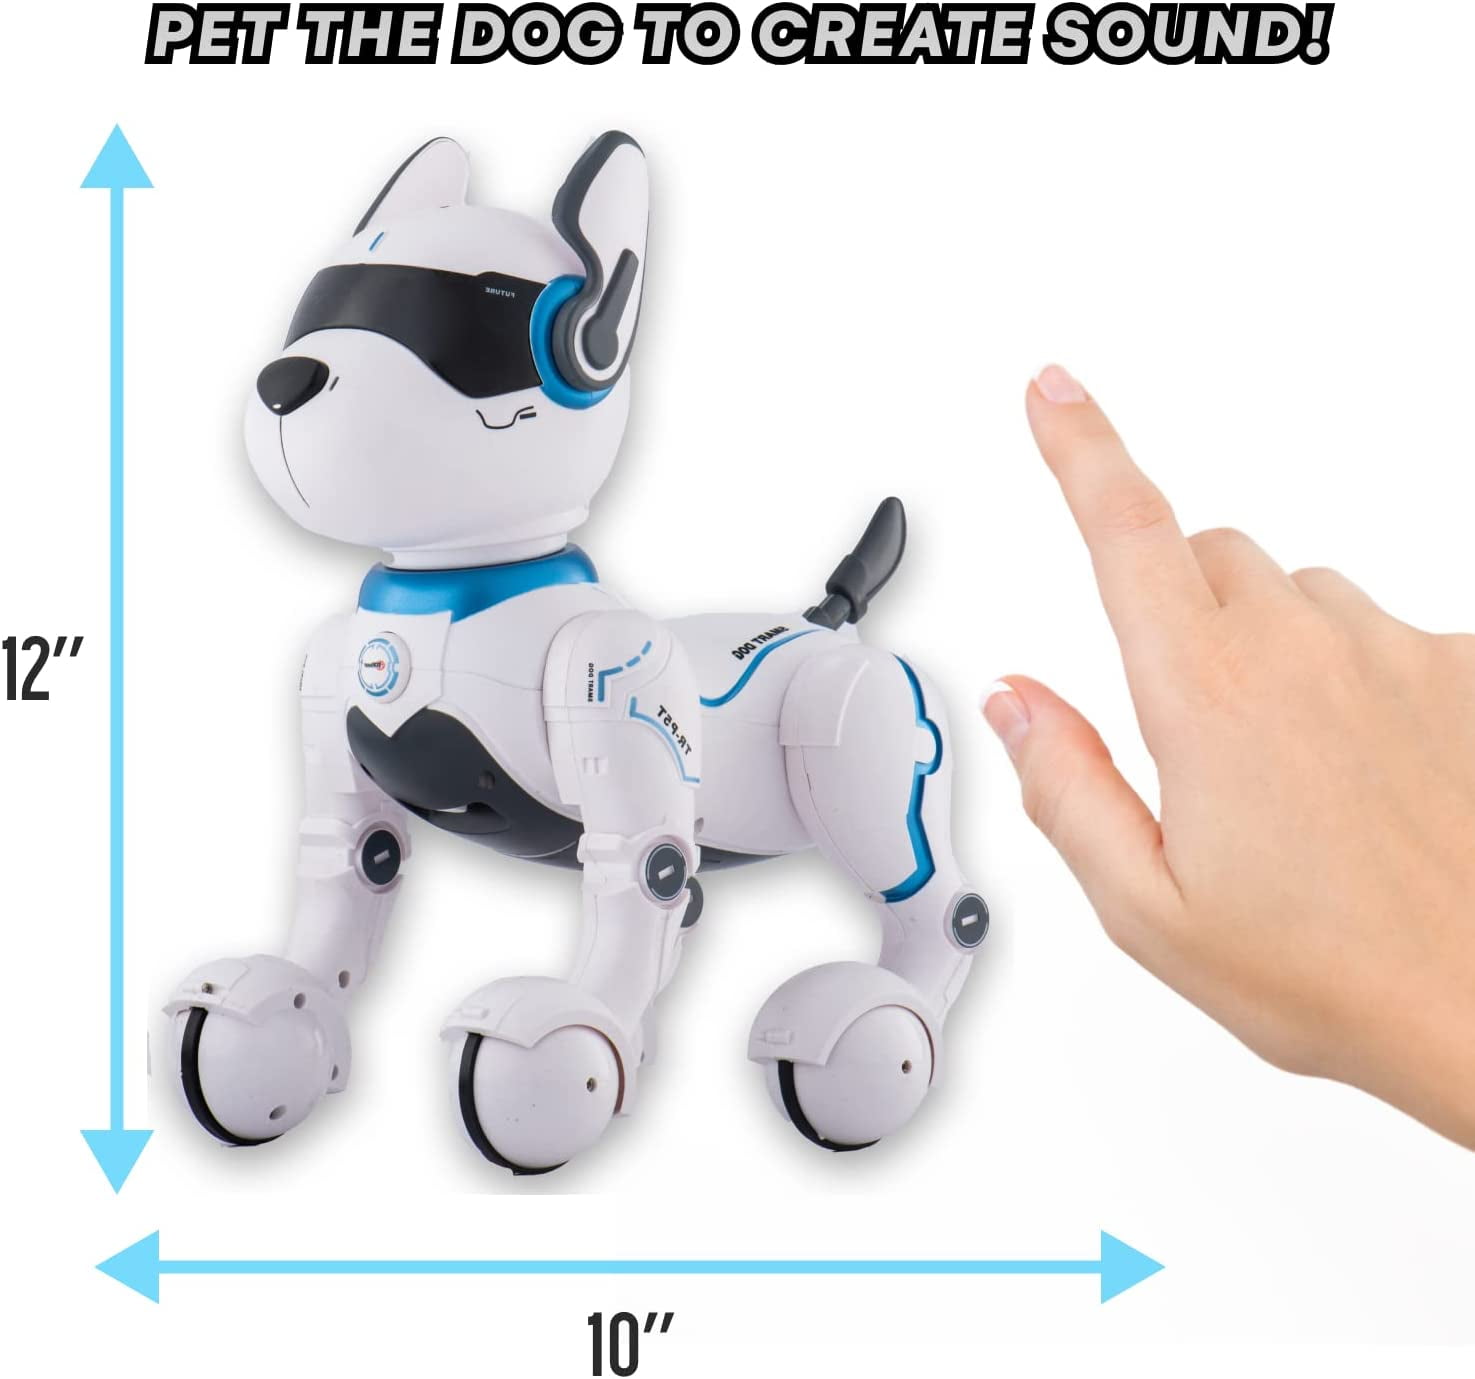 Dropship Remote Controlled Machine Dog Toy; Kids Robot; Remote Controlled  Machine Dog Toy; For Kids 2-10 Years Old & Over; Smart & Dance Robot Toy;  Animal Simulation Mini Pet Dog Robot to Sell Online at a Lower Price